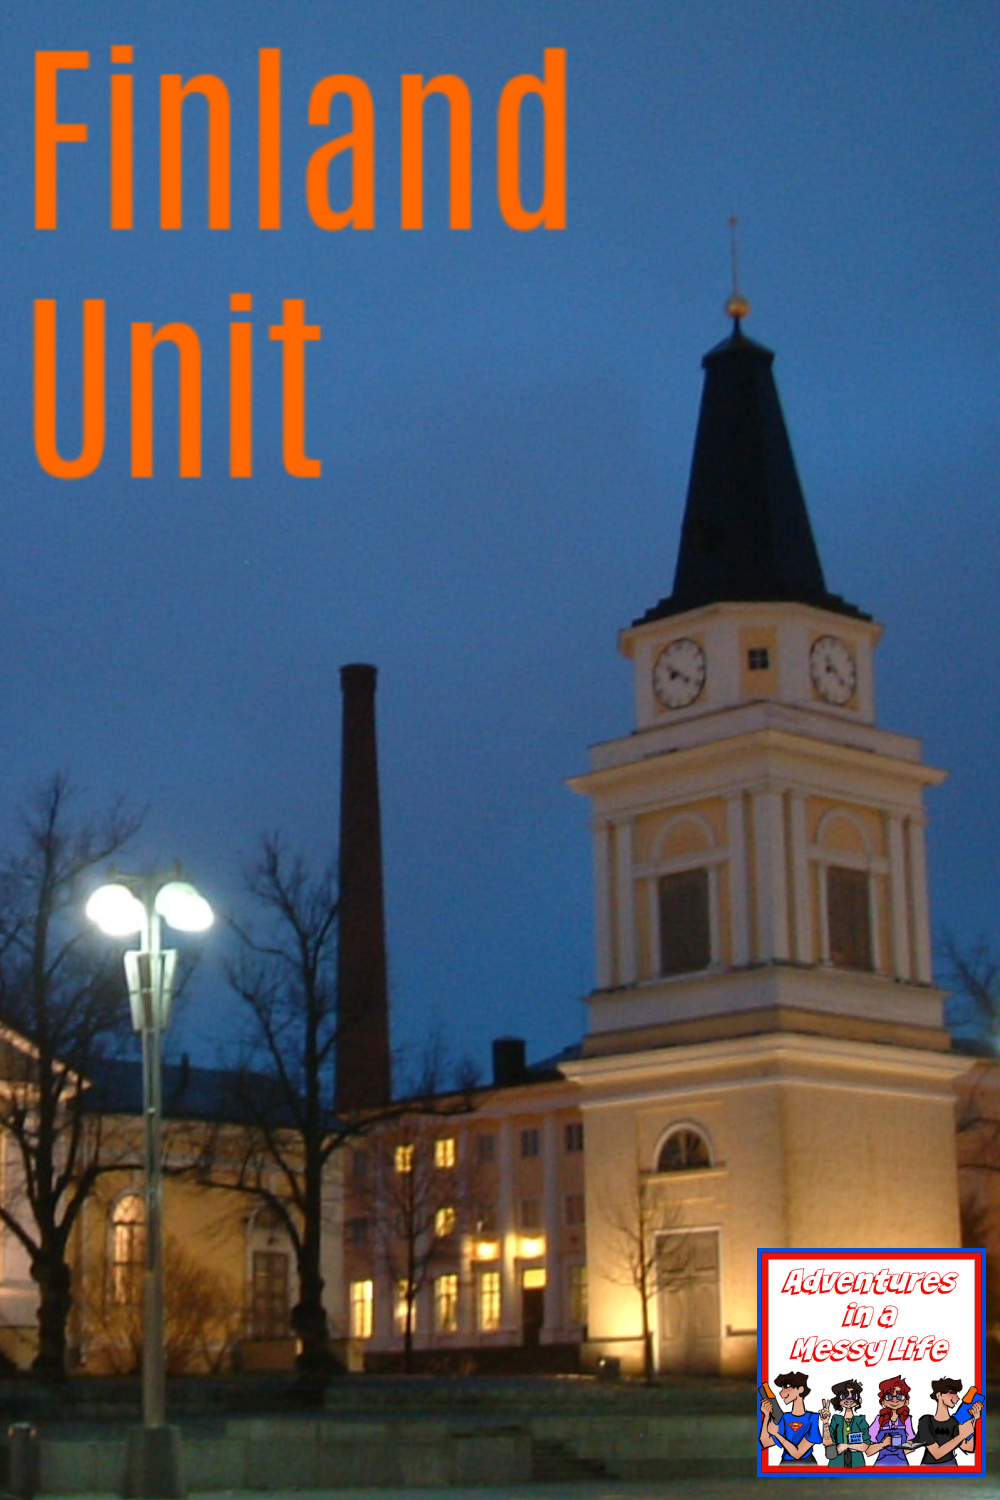 Finland Unit for geography lesson in your homeschool explore the culture, history, and food